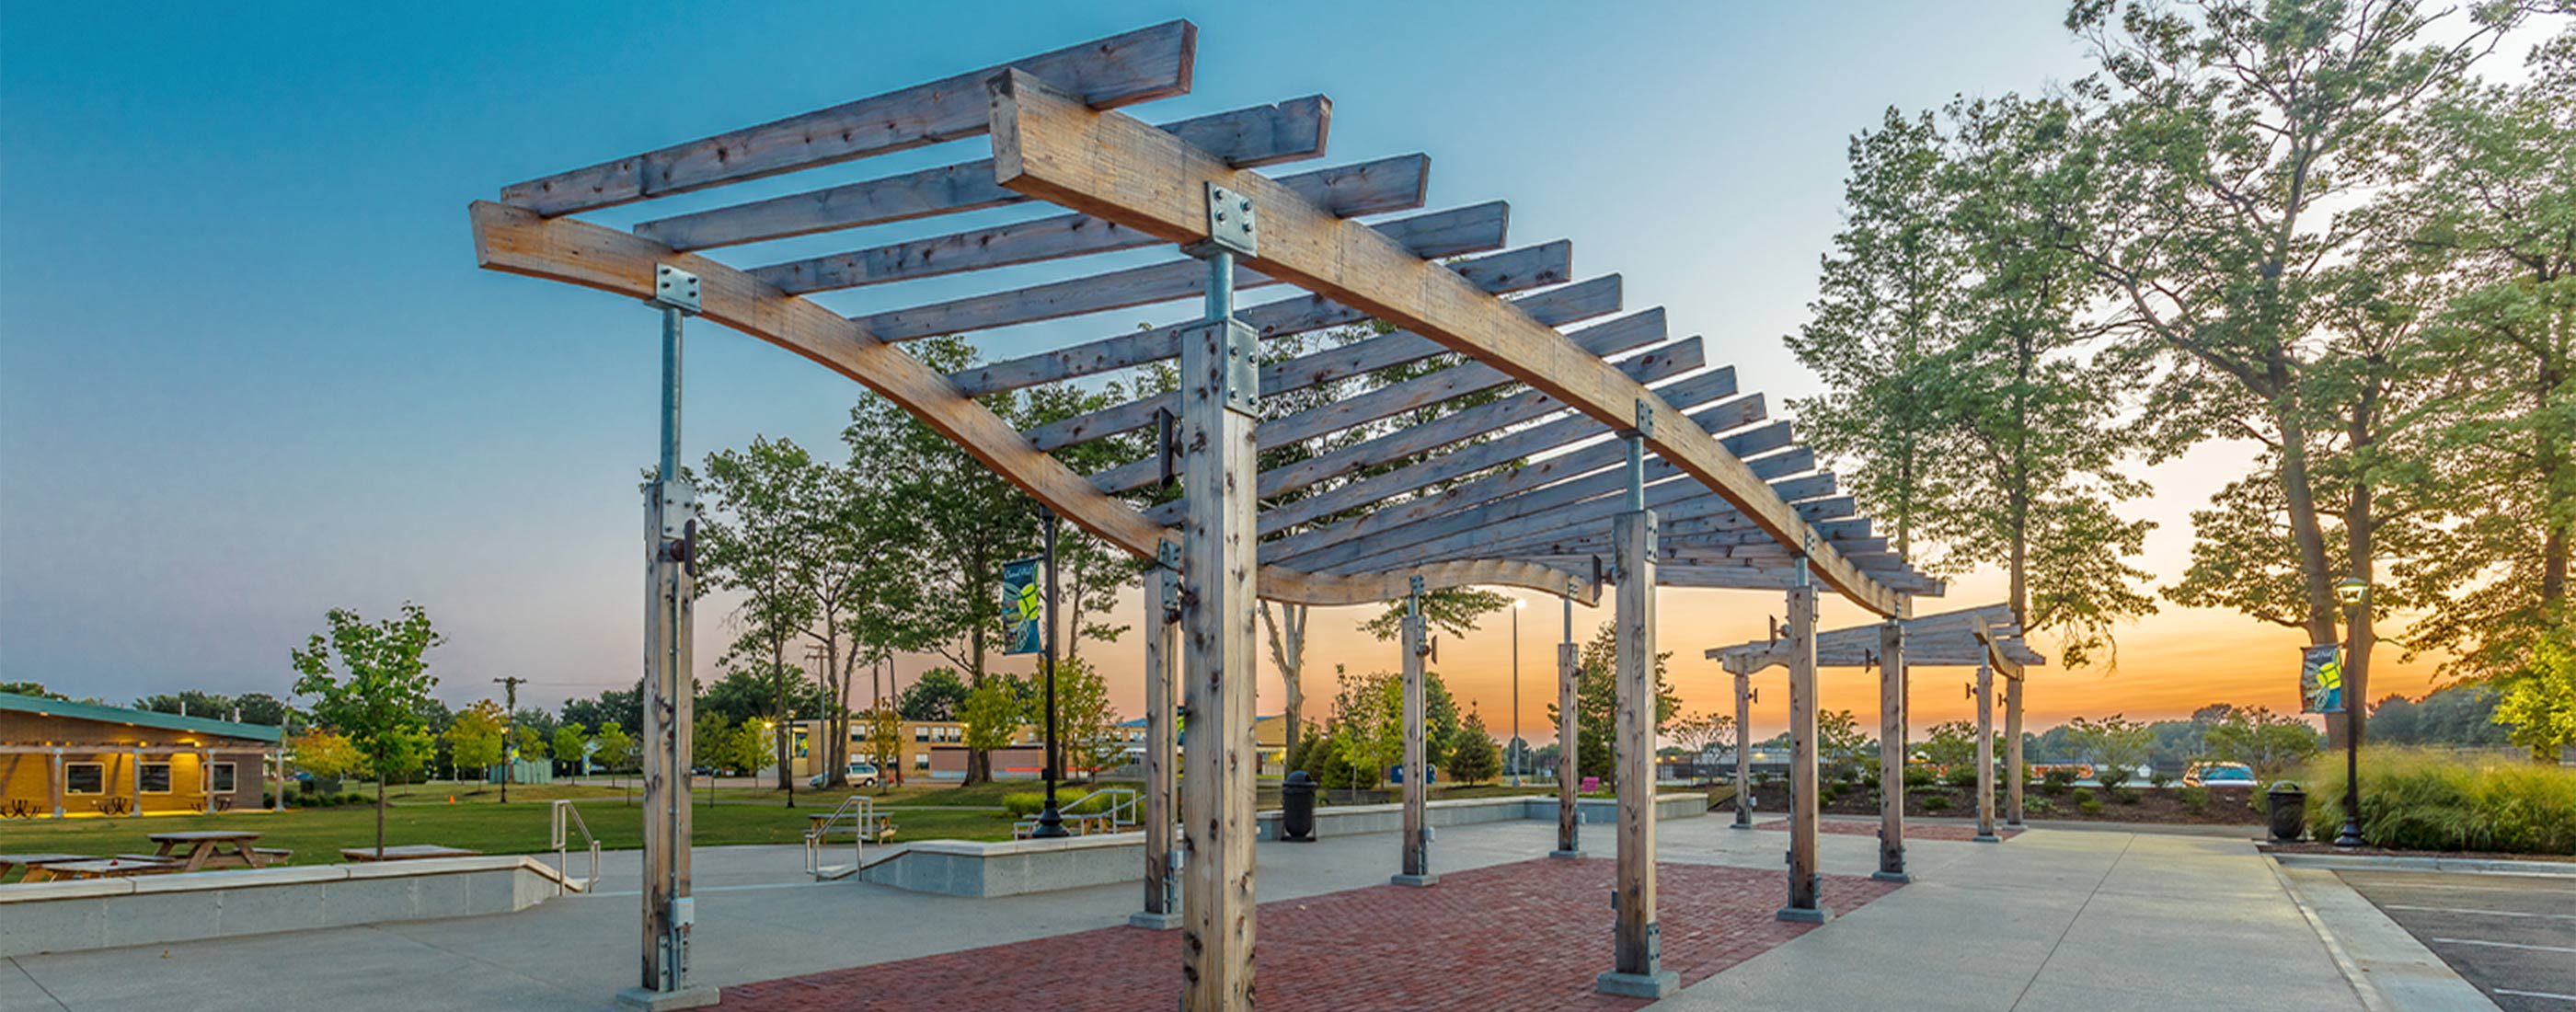 City of Green's Central Park offers abundant amenities for residents and visitors.